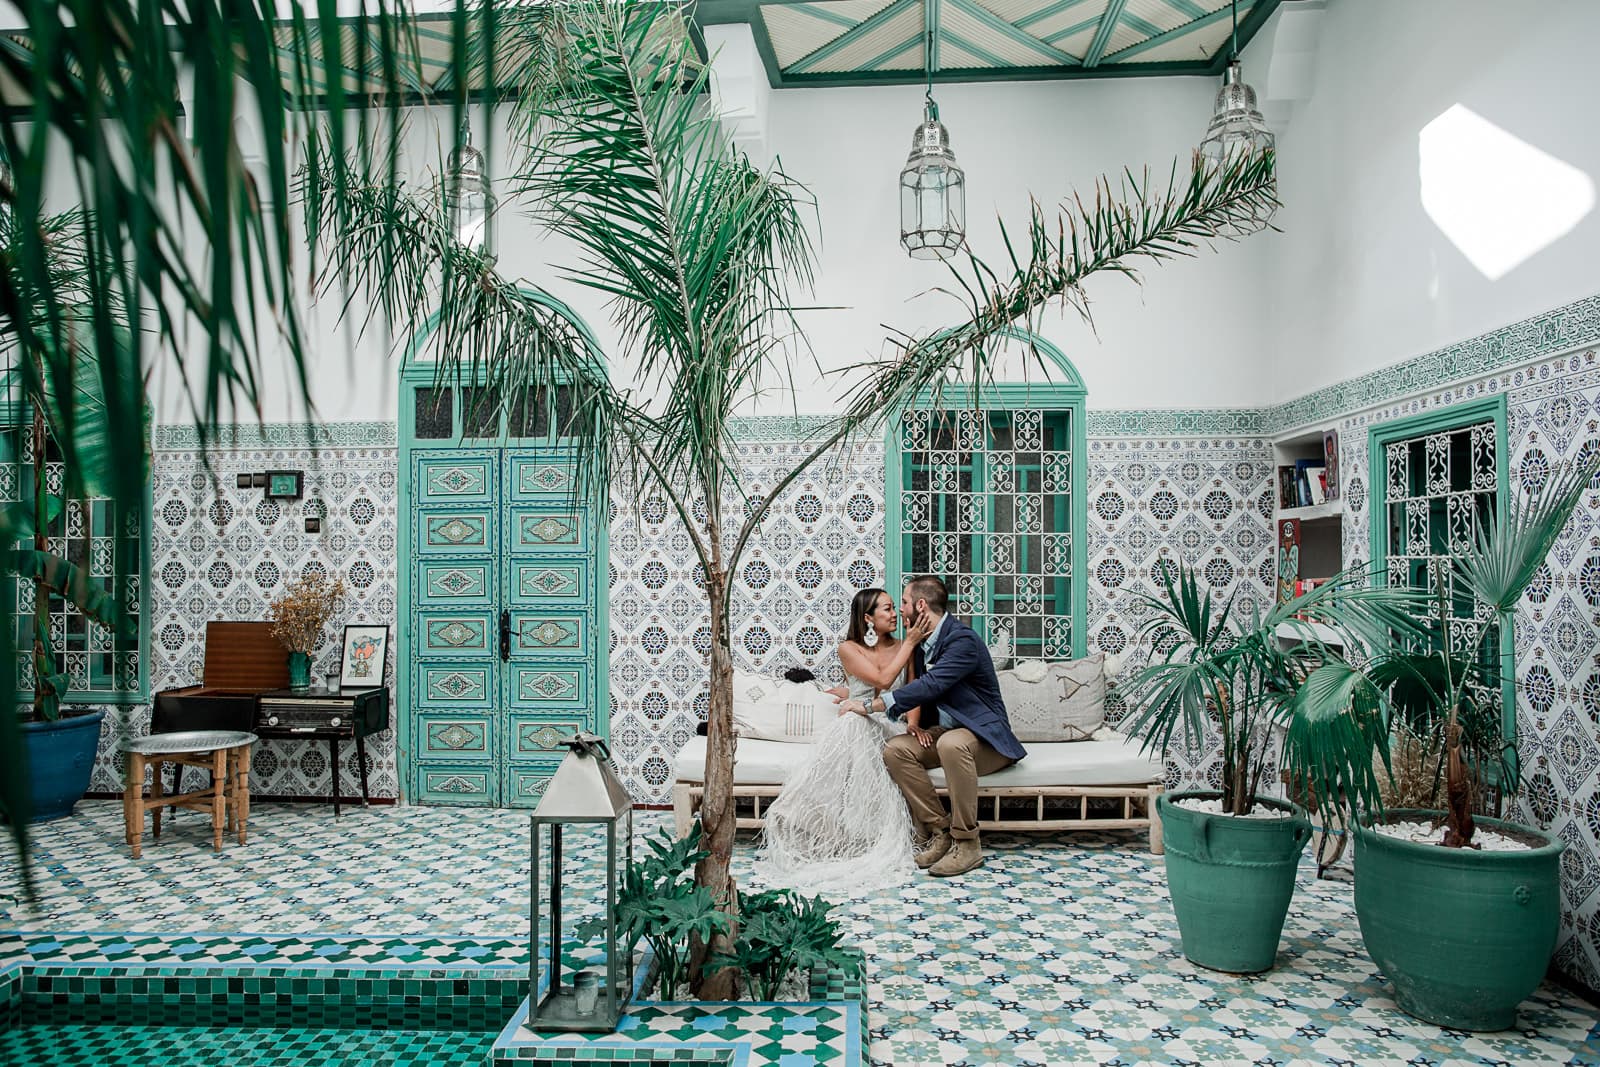 Bride and groom sit together in Be Riad in Marrakech, Morocco before wedding ceremony